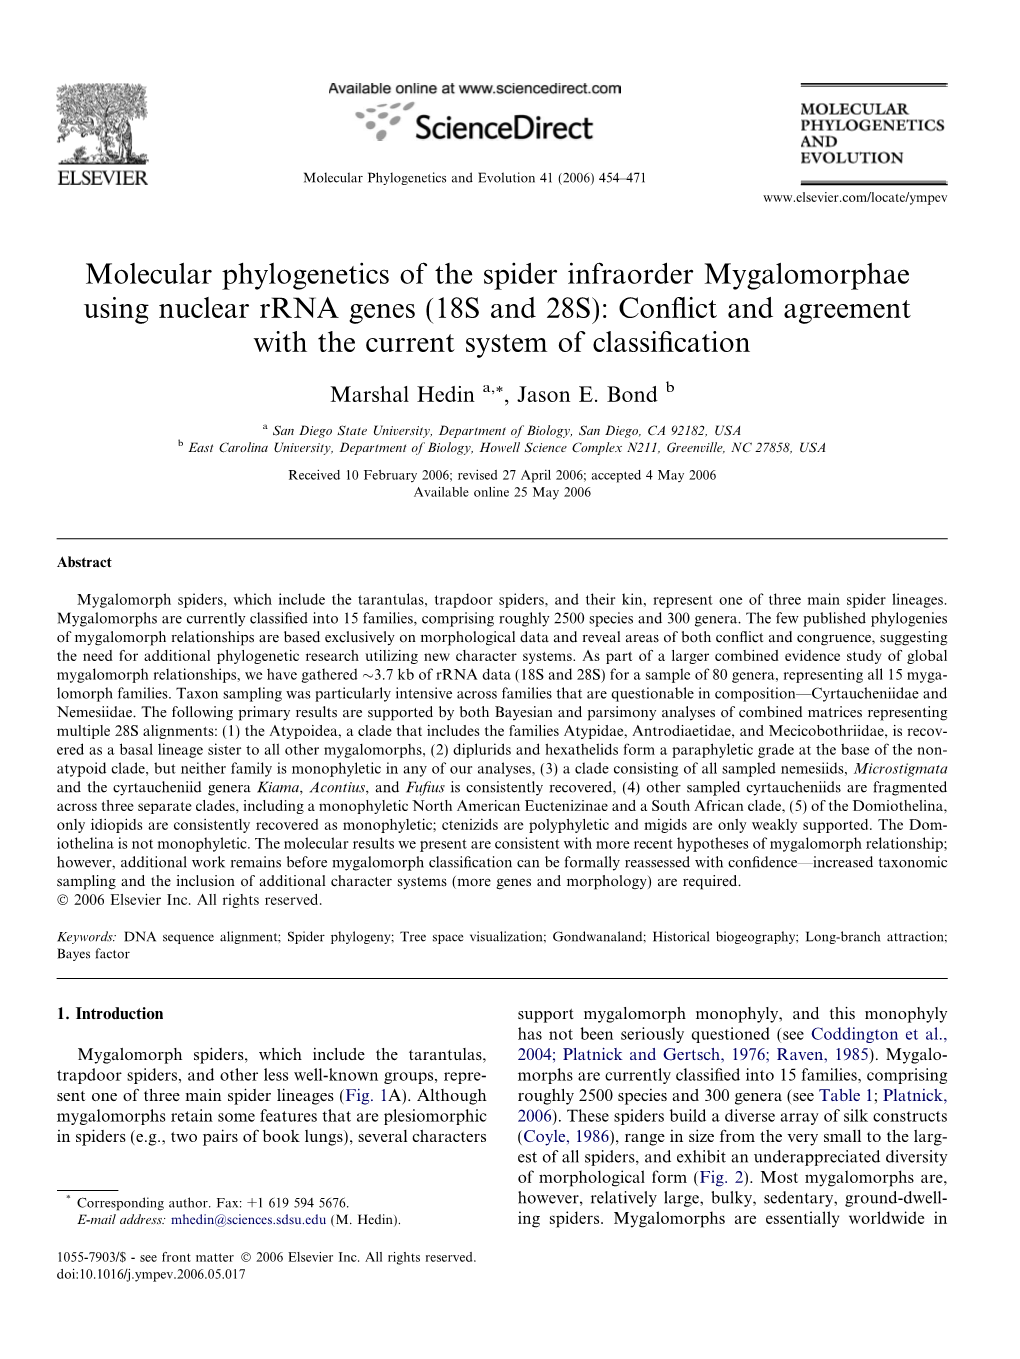 Molecular Phylogenetics of the Spider Infraorder Mygalomorphae Using Nuclear Rrna Genes (18S and 28S): Conﬂict and Agreement with the Current System of Classiﬁcation